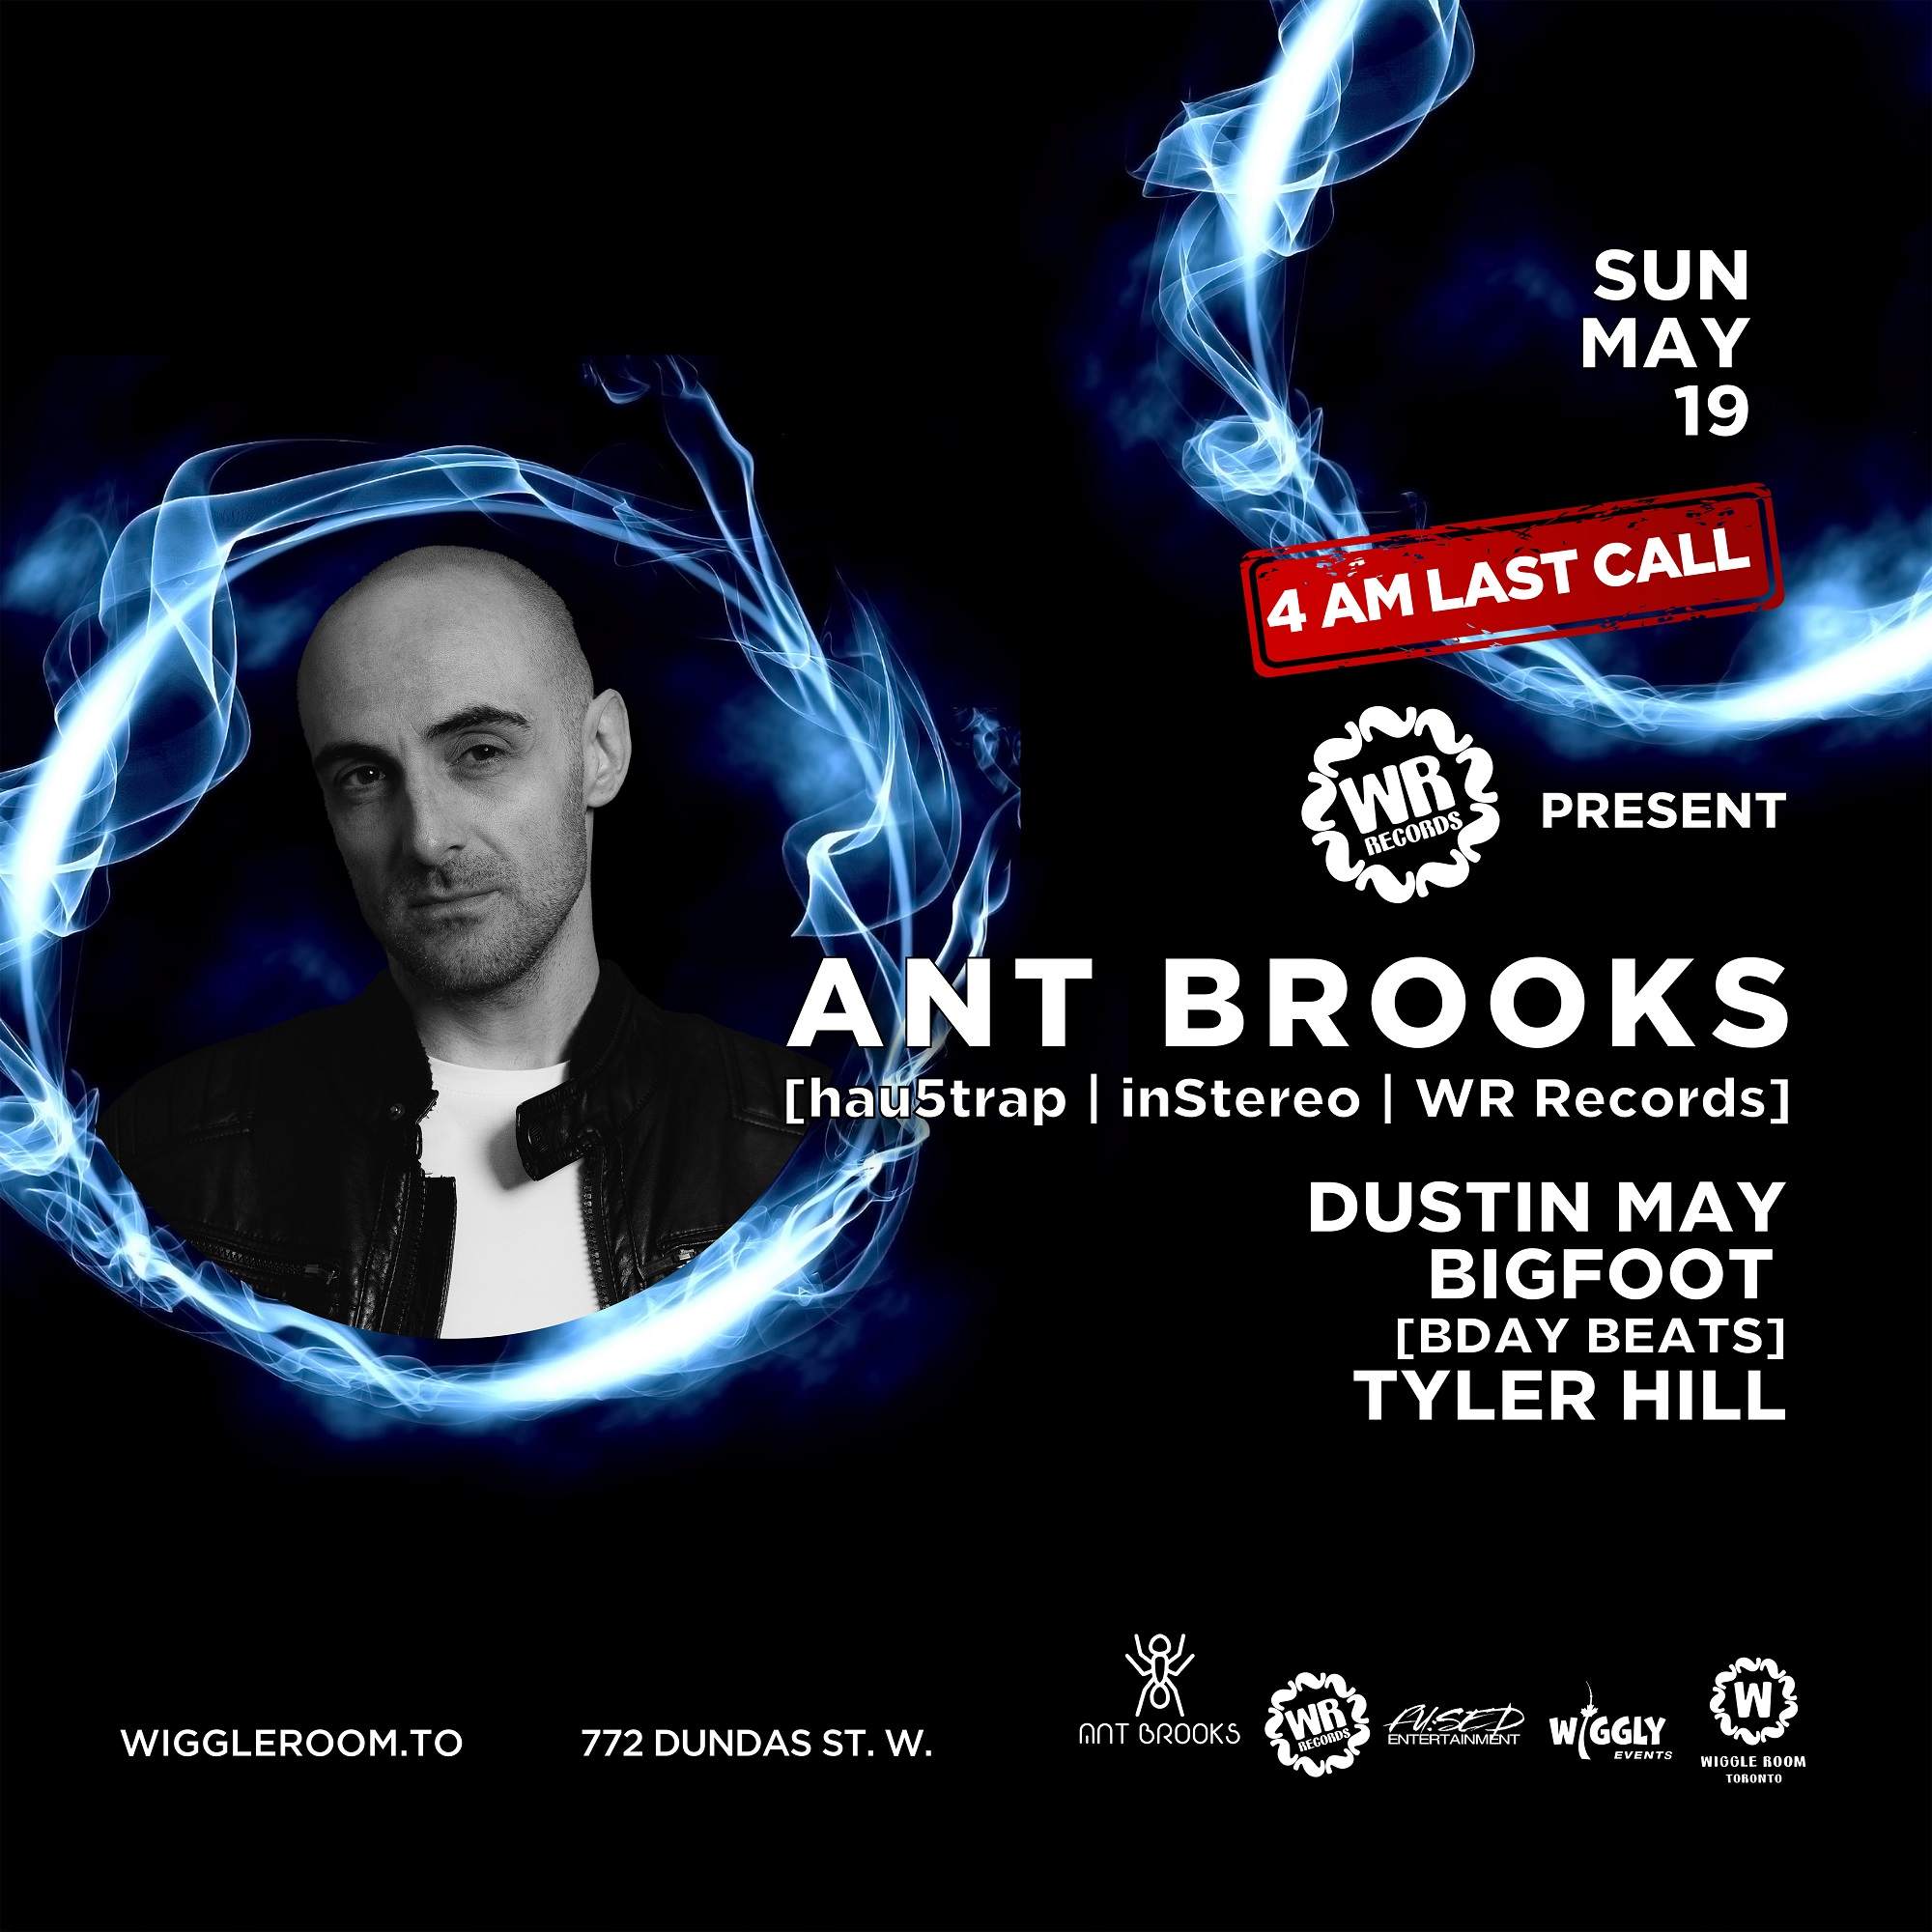 WR Records: Ant Brooks | 4AM LAST CALL - FREE ENTRY with EP Purchase - Página frontal